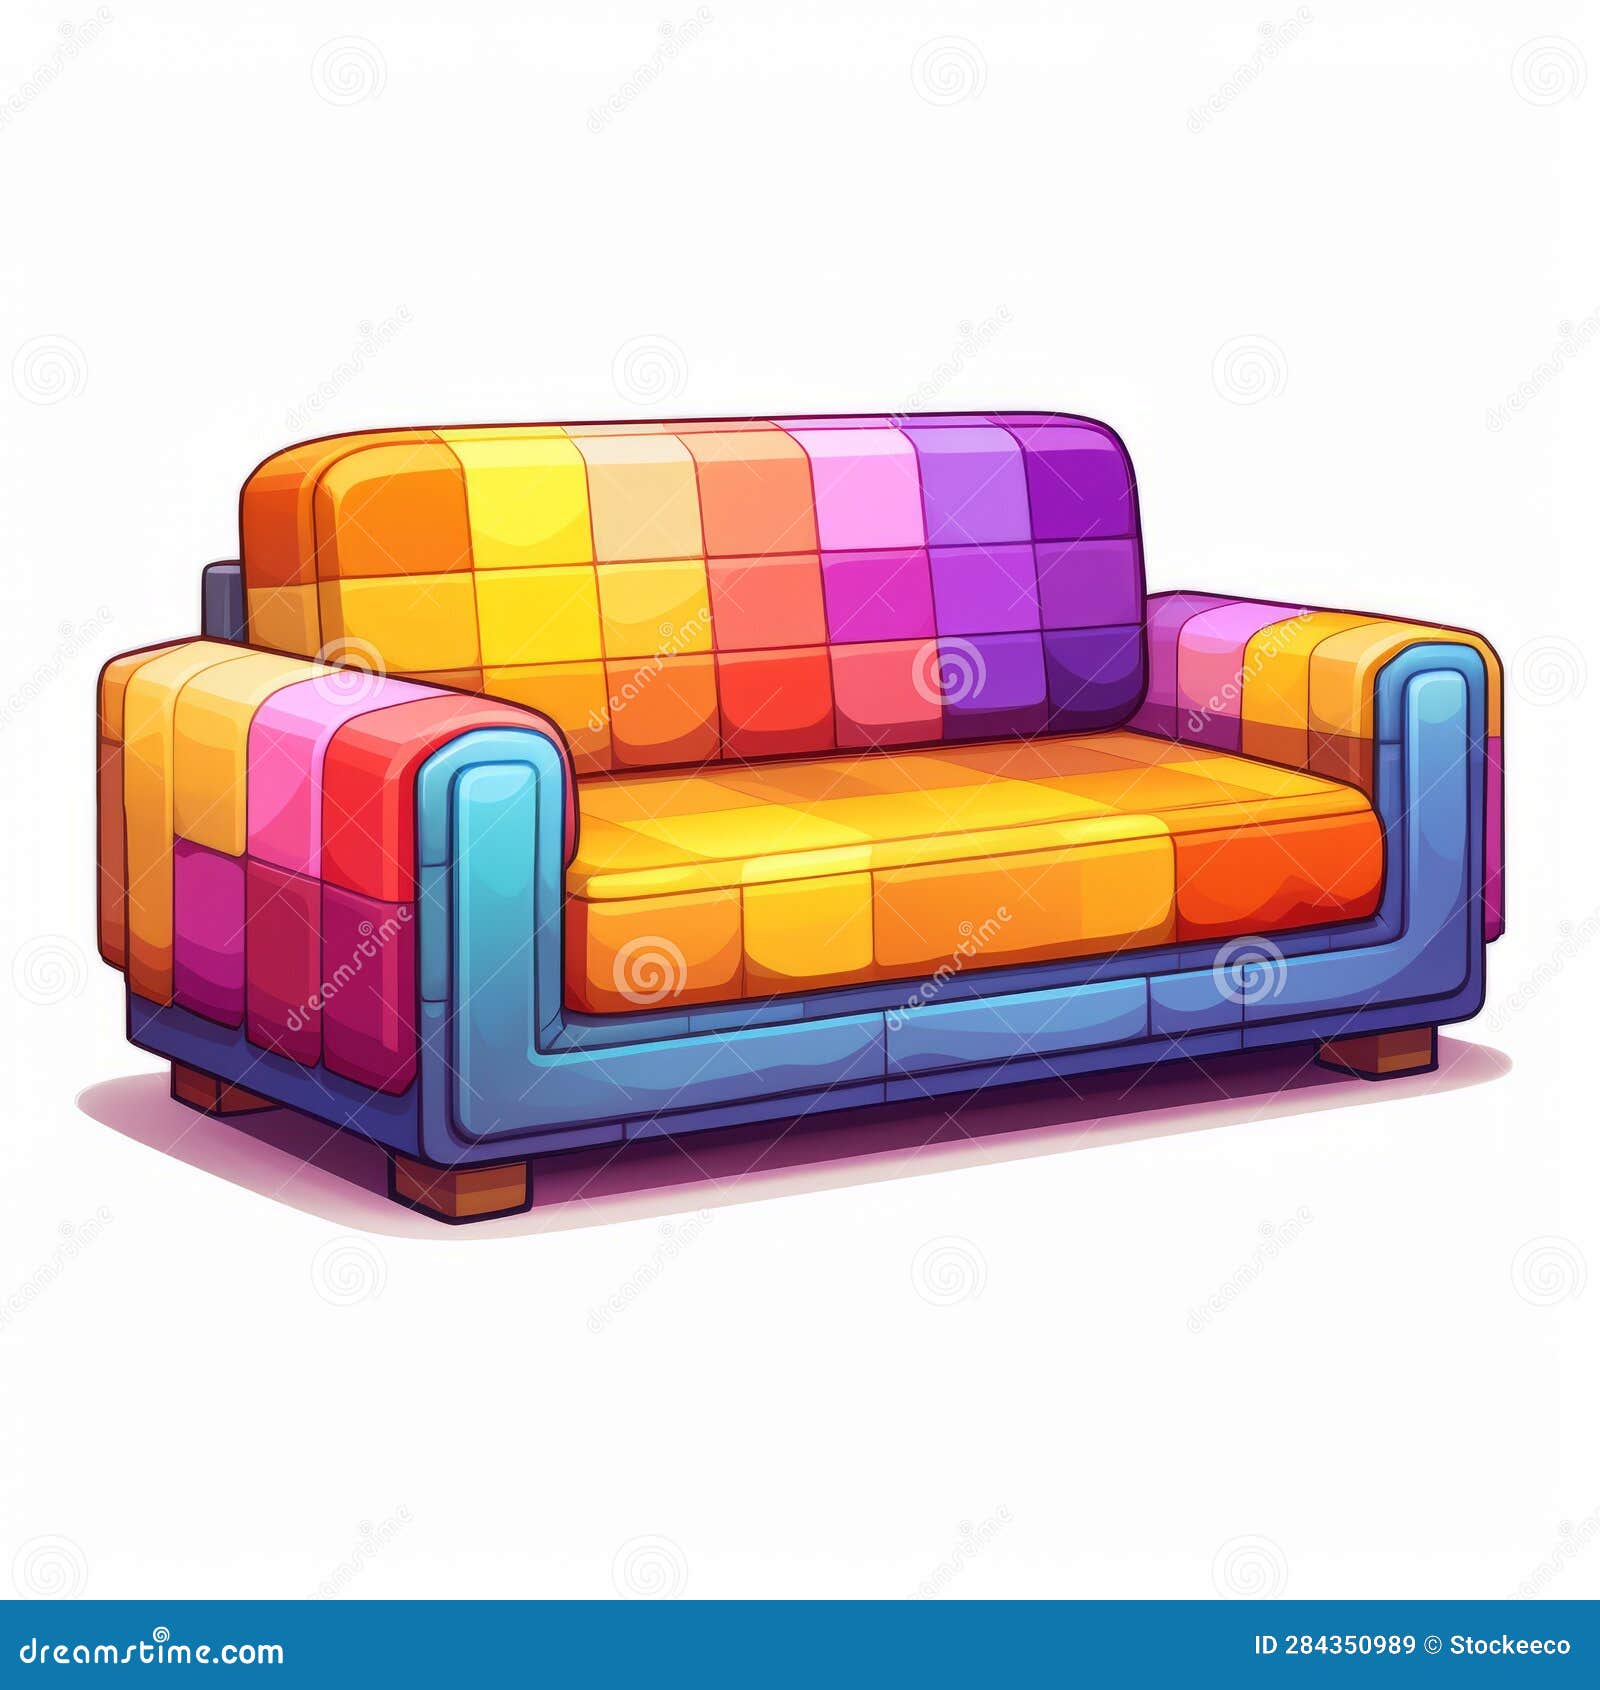 colorful cartoon couch  